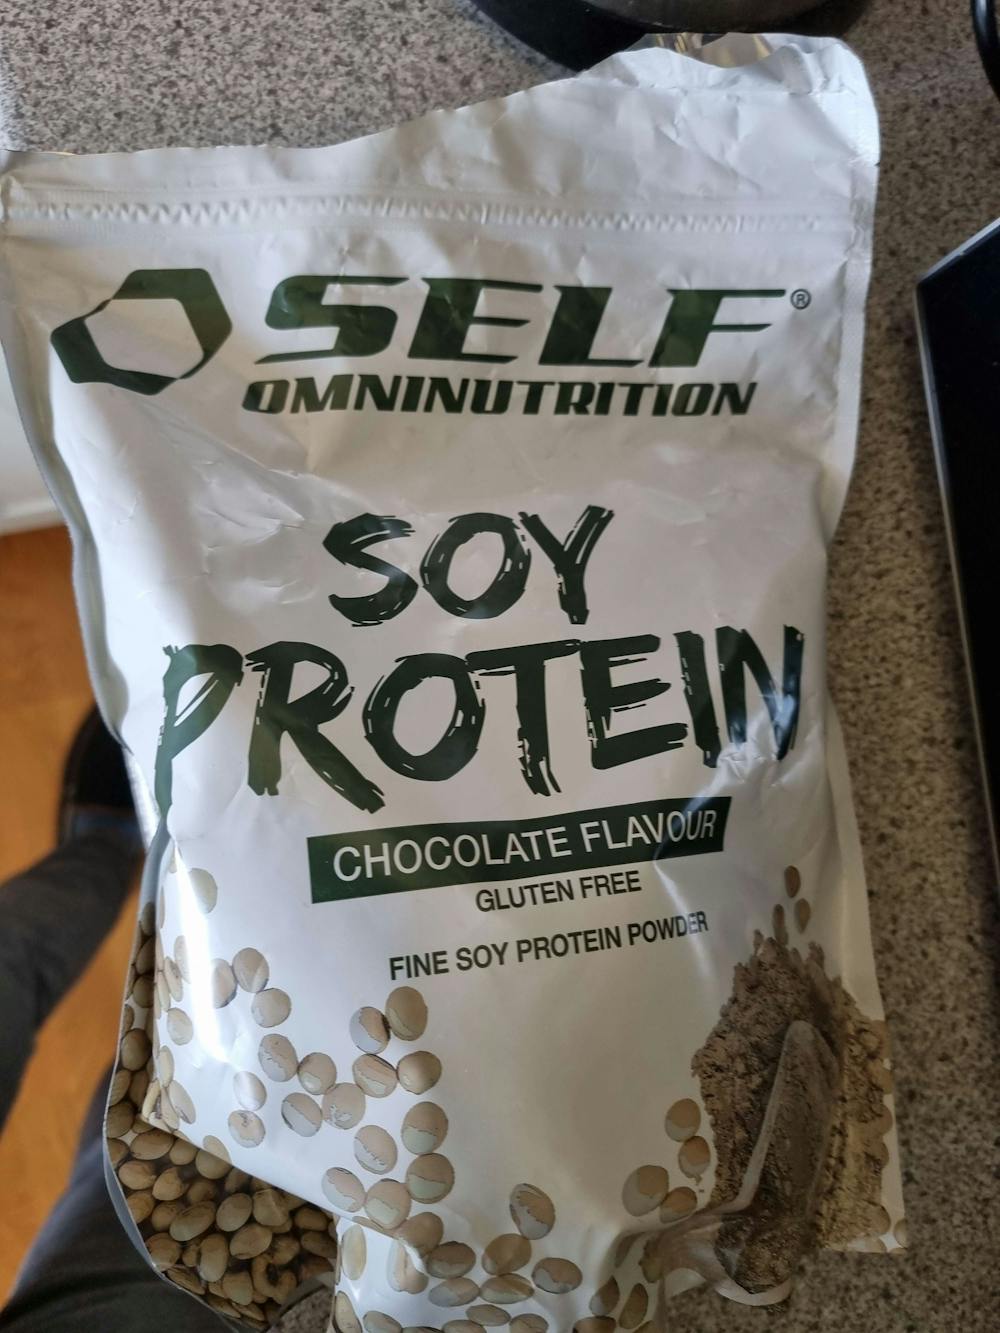 Soy protein, Self omninutrition